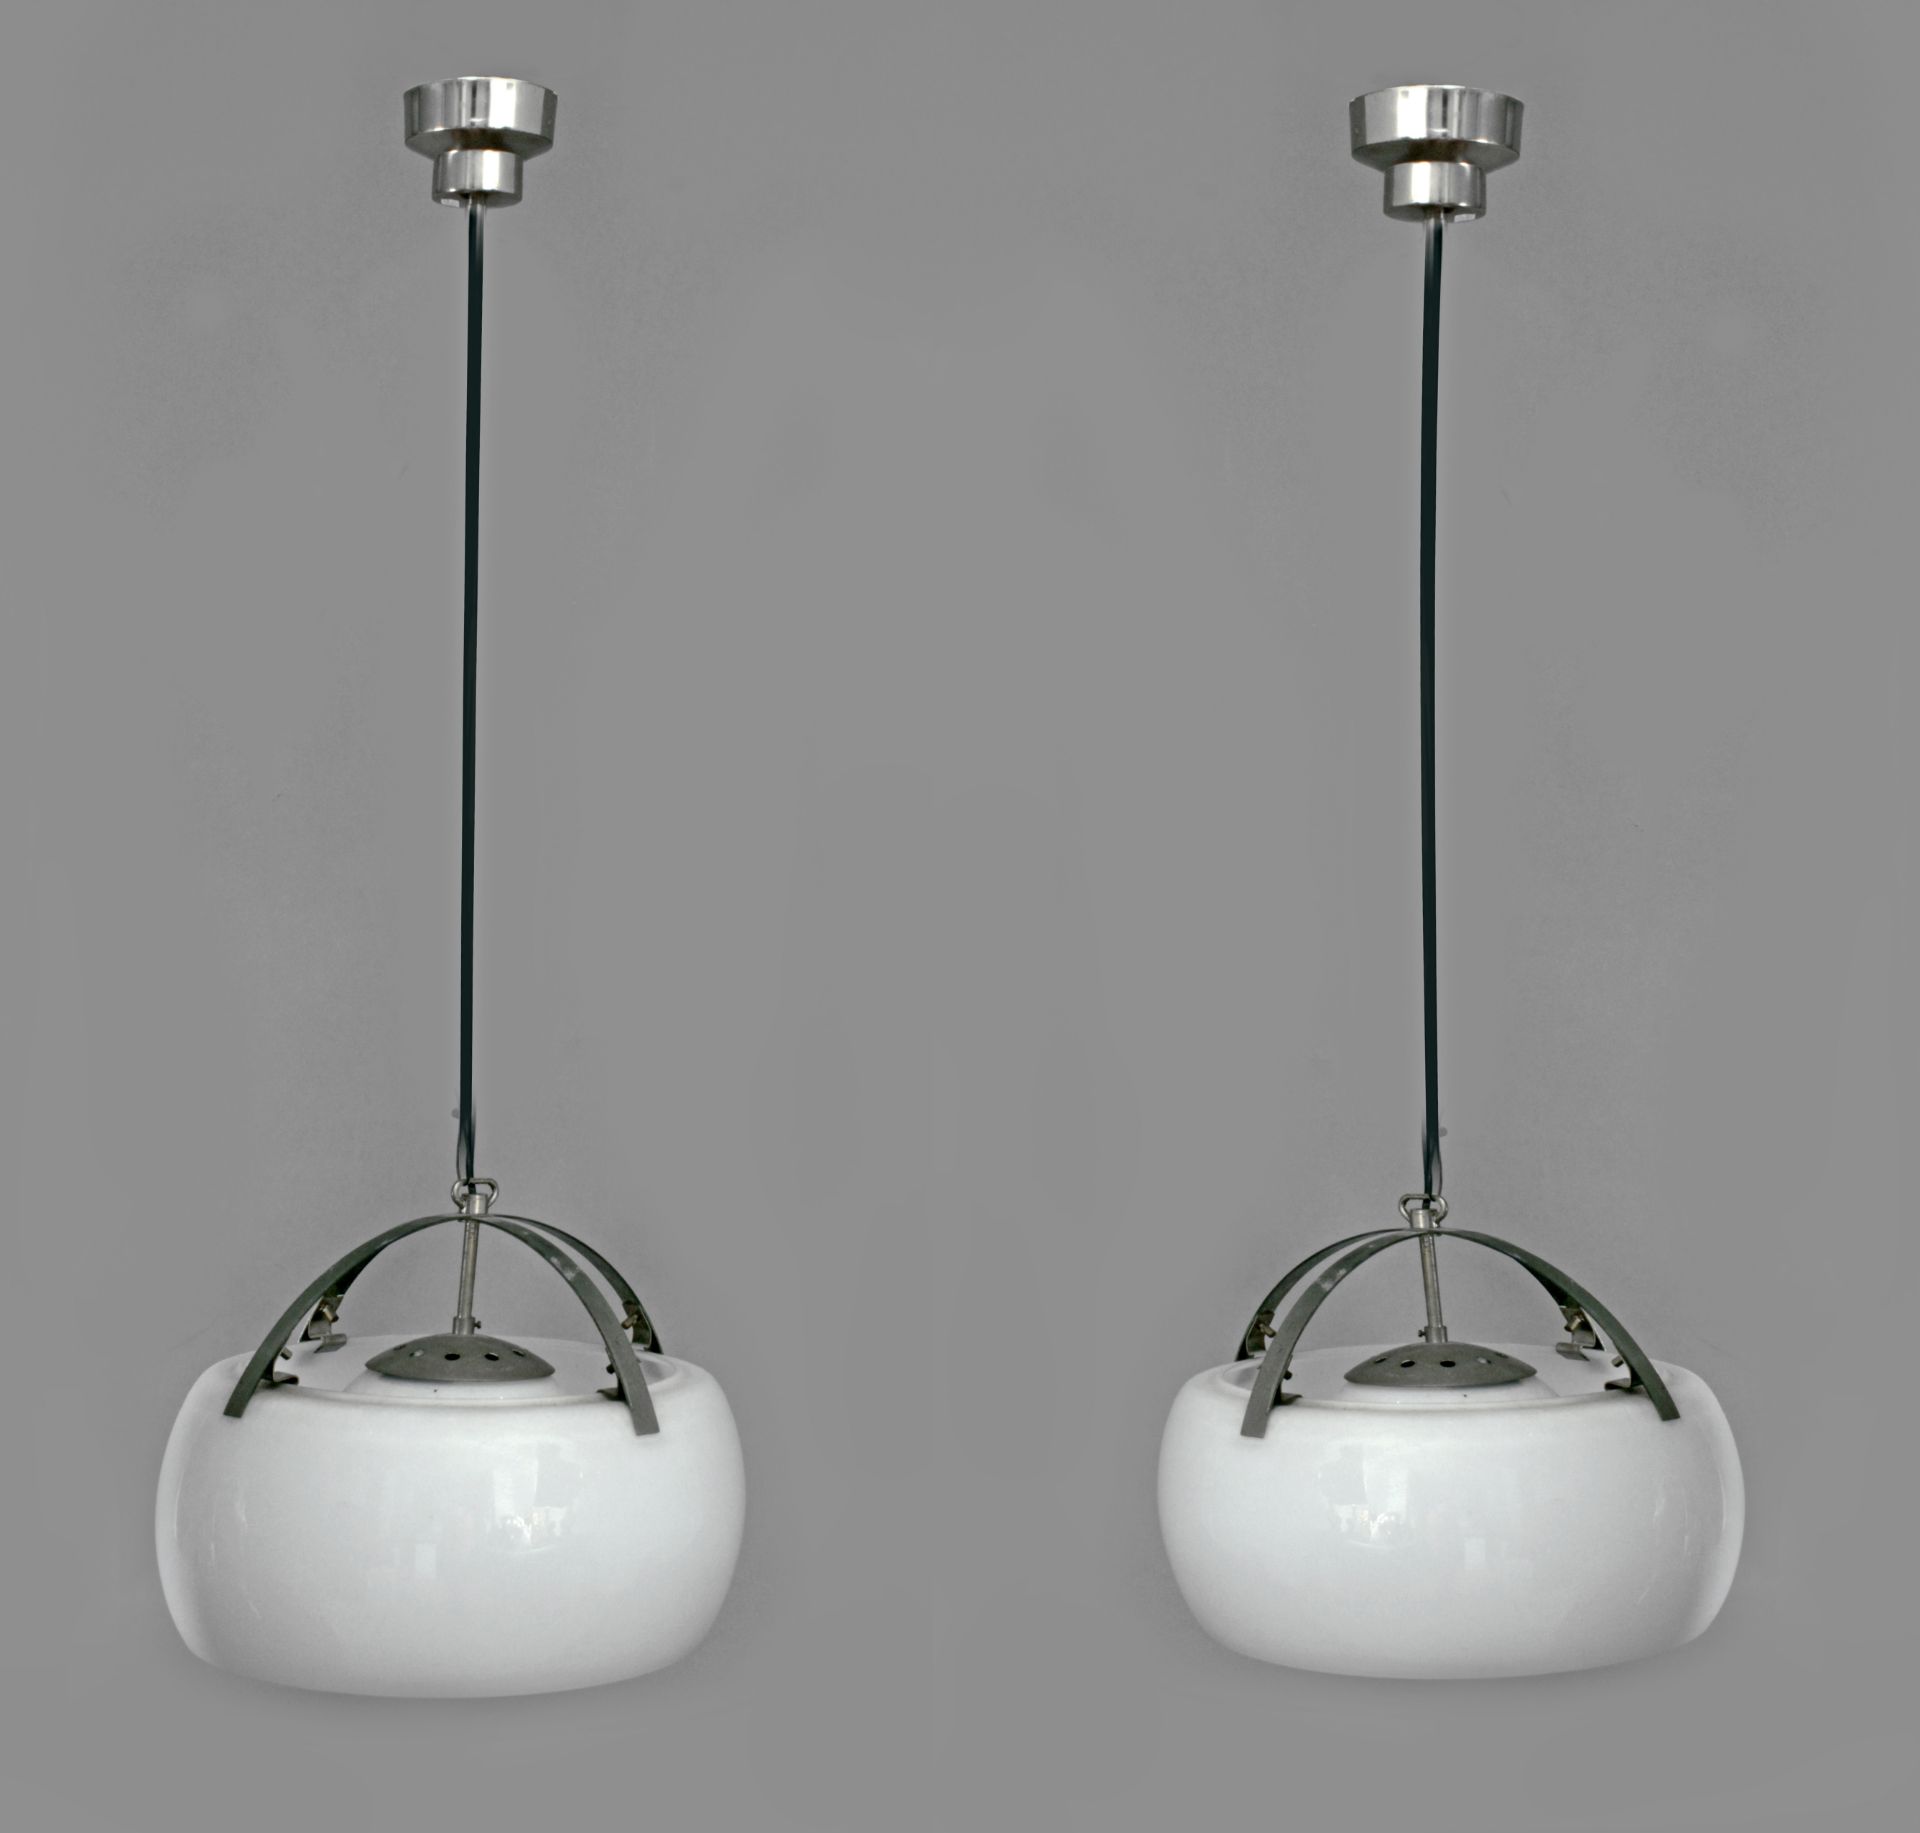 Vico Magistretti for Artemide circa 1960-1969. A pair of Omega ceiling lamps